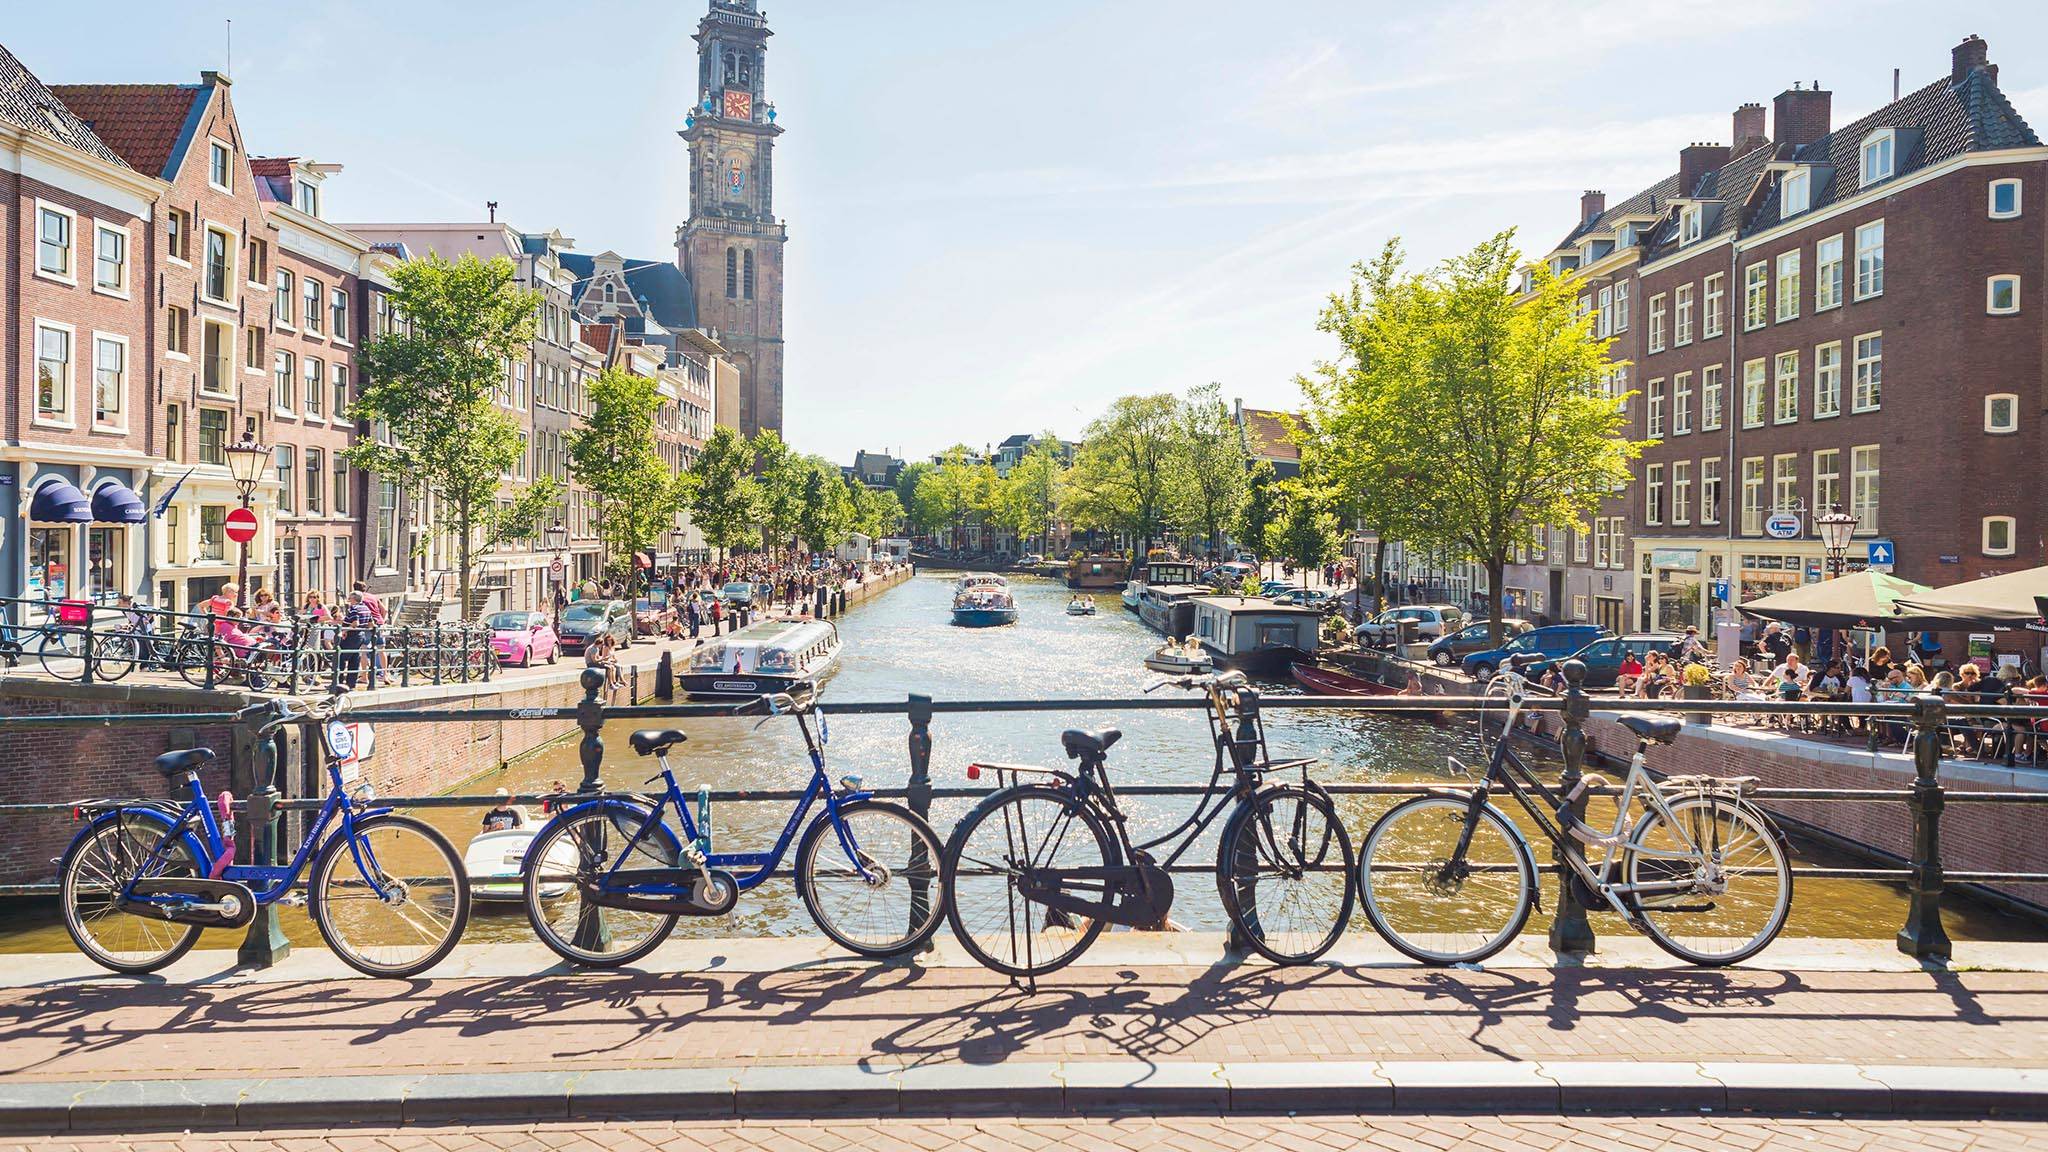 What is like Immigrating and living in The Netherlands?